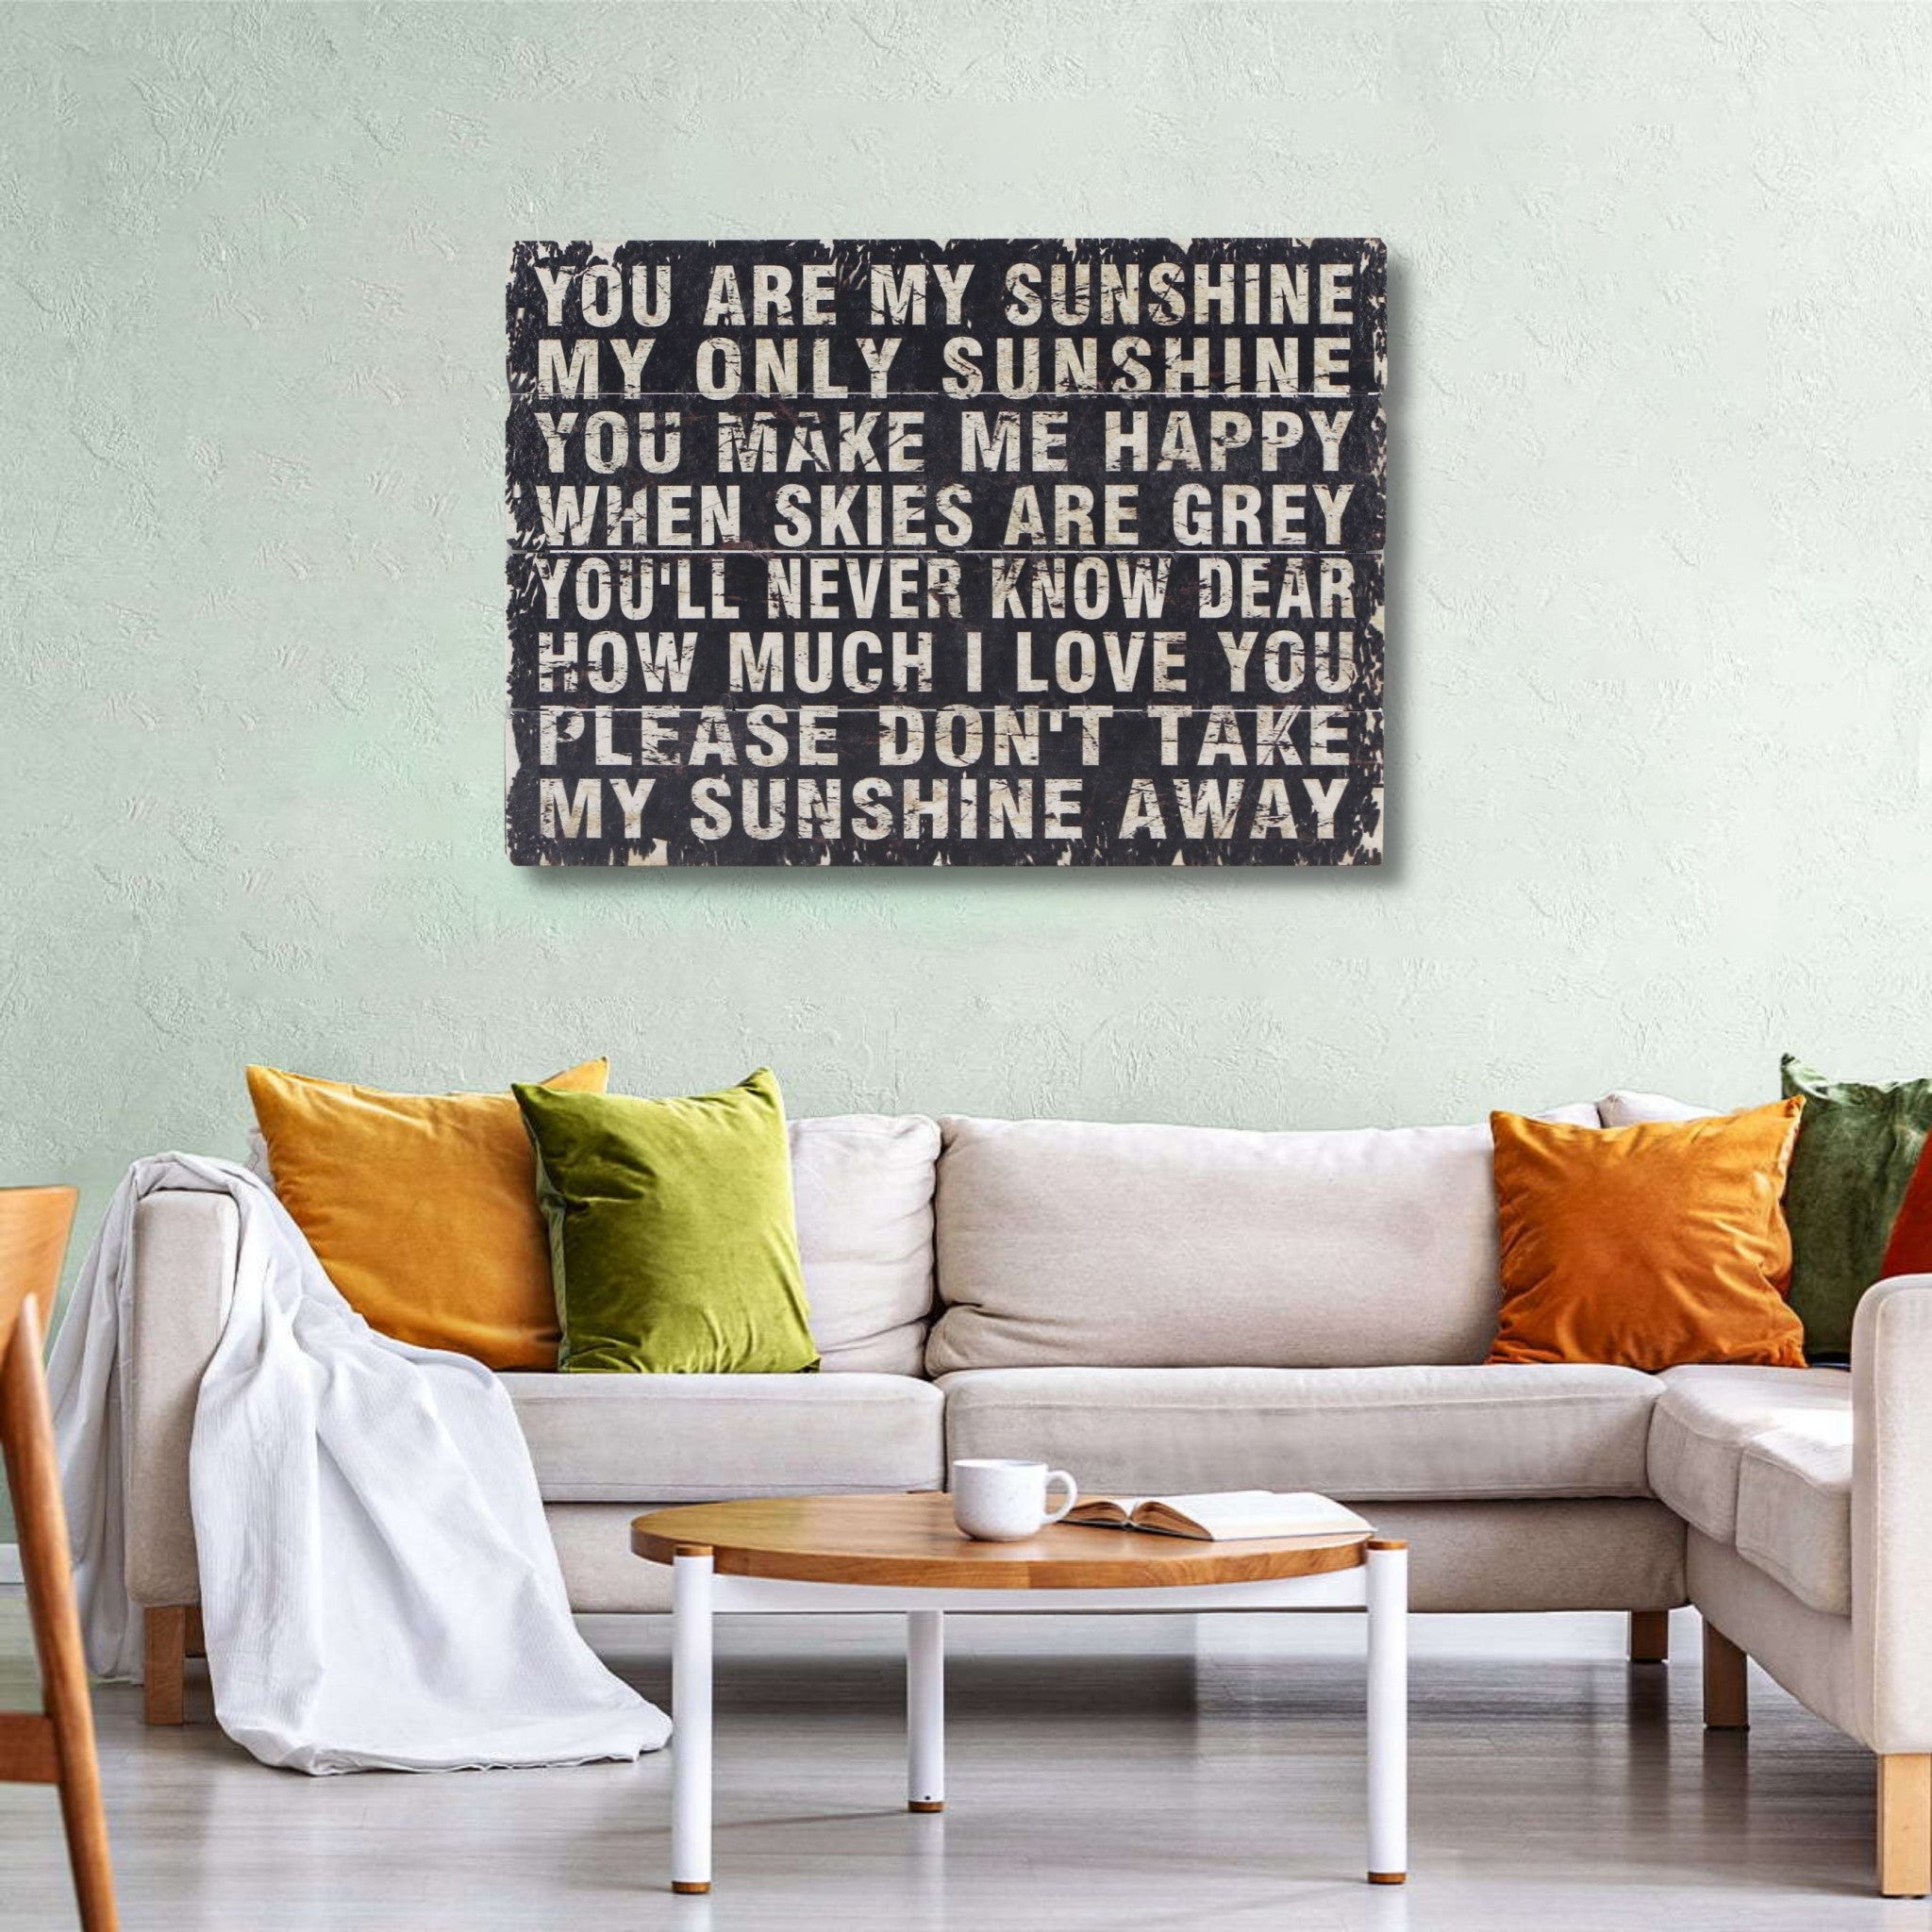 Black Wooden You Are My Sunshine Wall Art